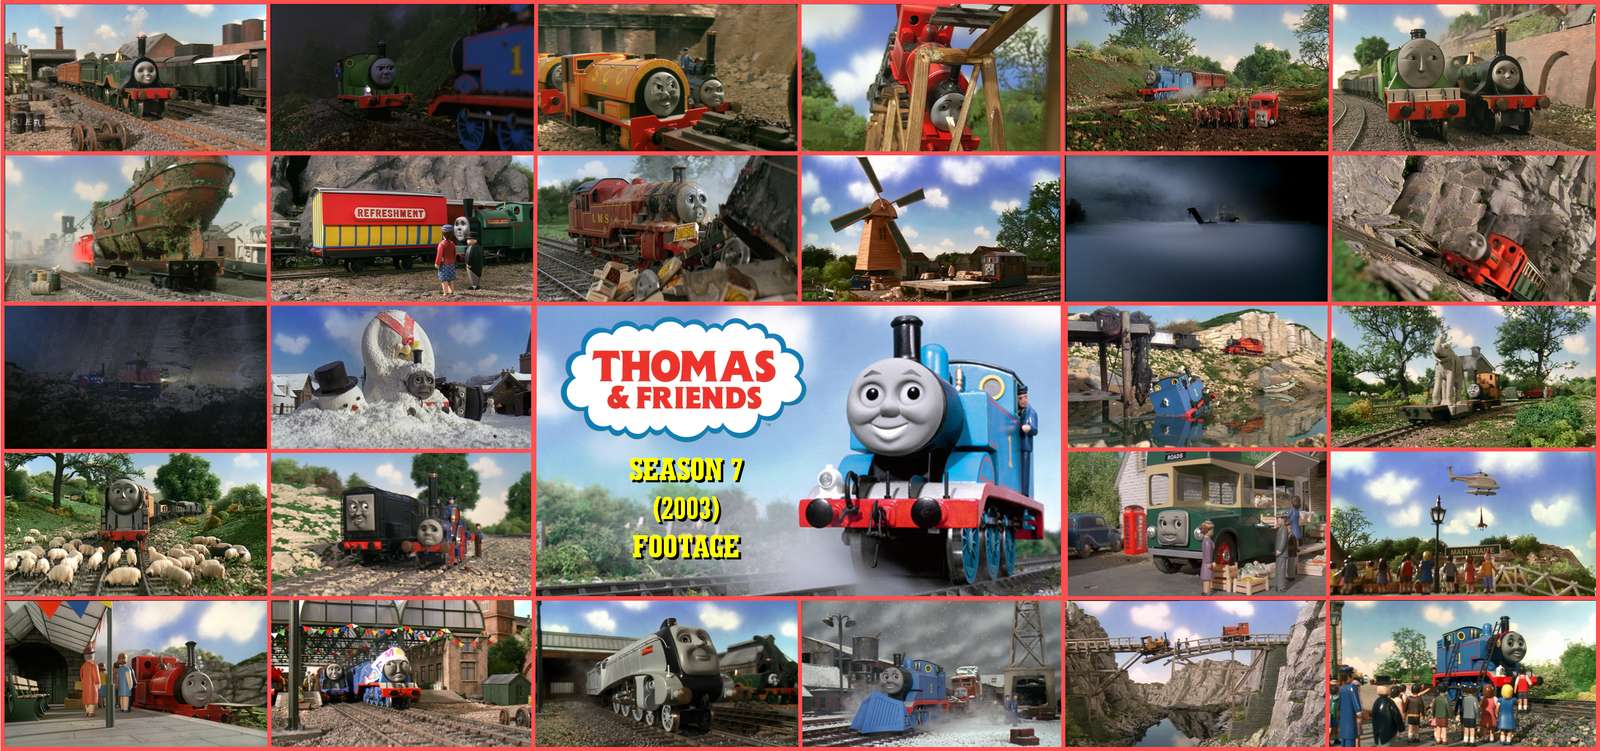 Thomas & Friends Season 7 puzzle online from photo